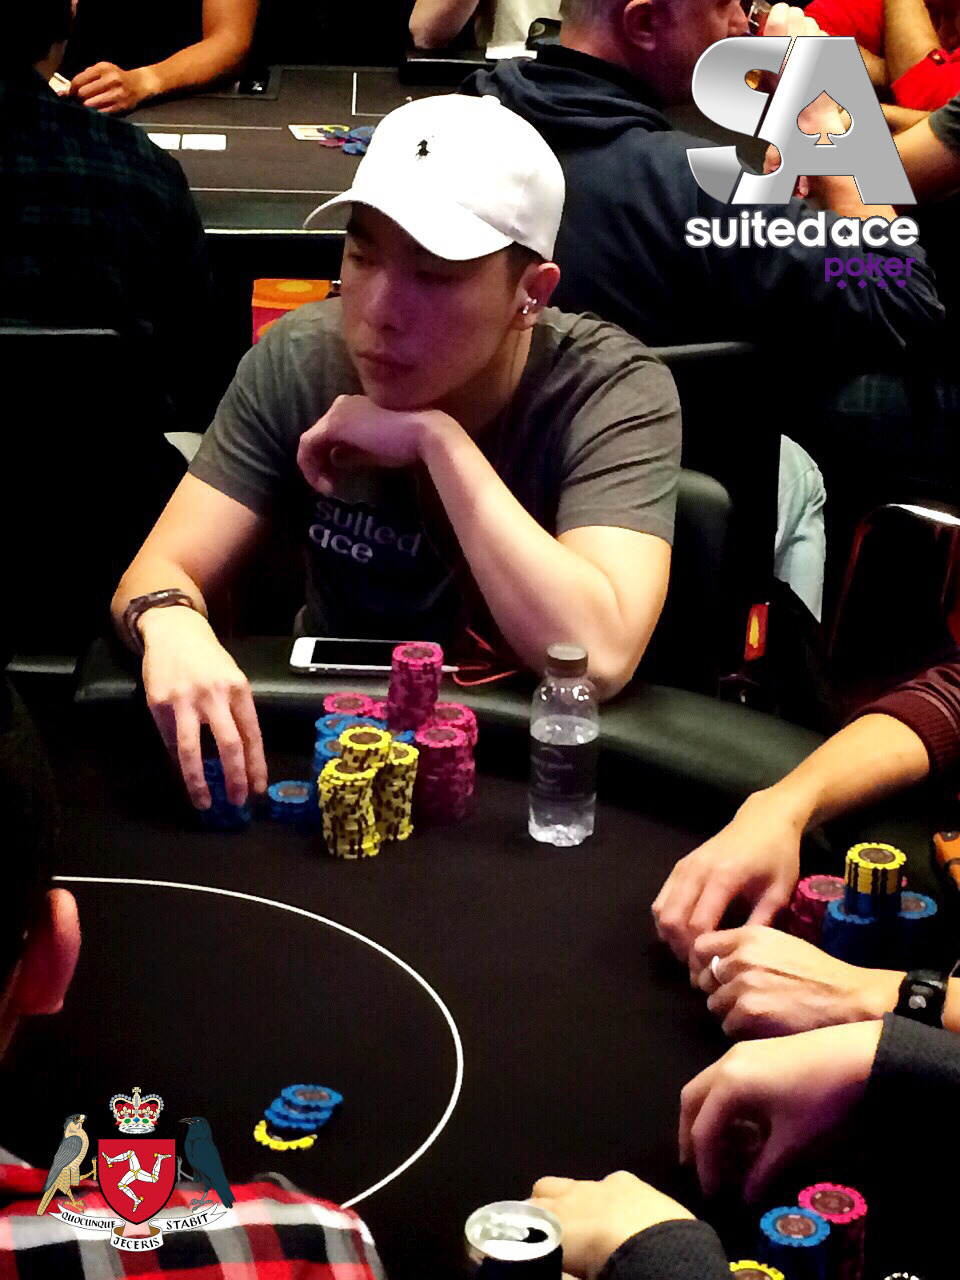 SuitedAce player Chan Wai Long made it to the final table of APPT 8 Asia Championship of Poker (ACOP), but finished 7th.